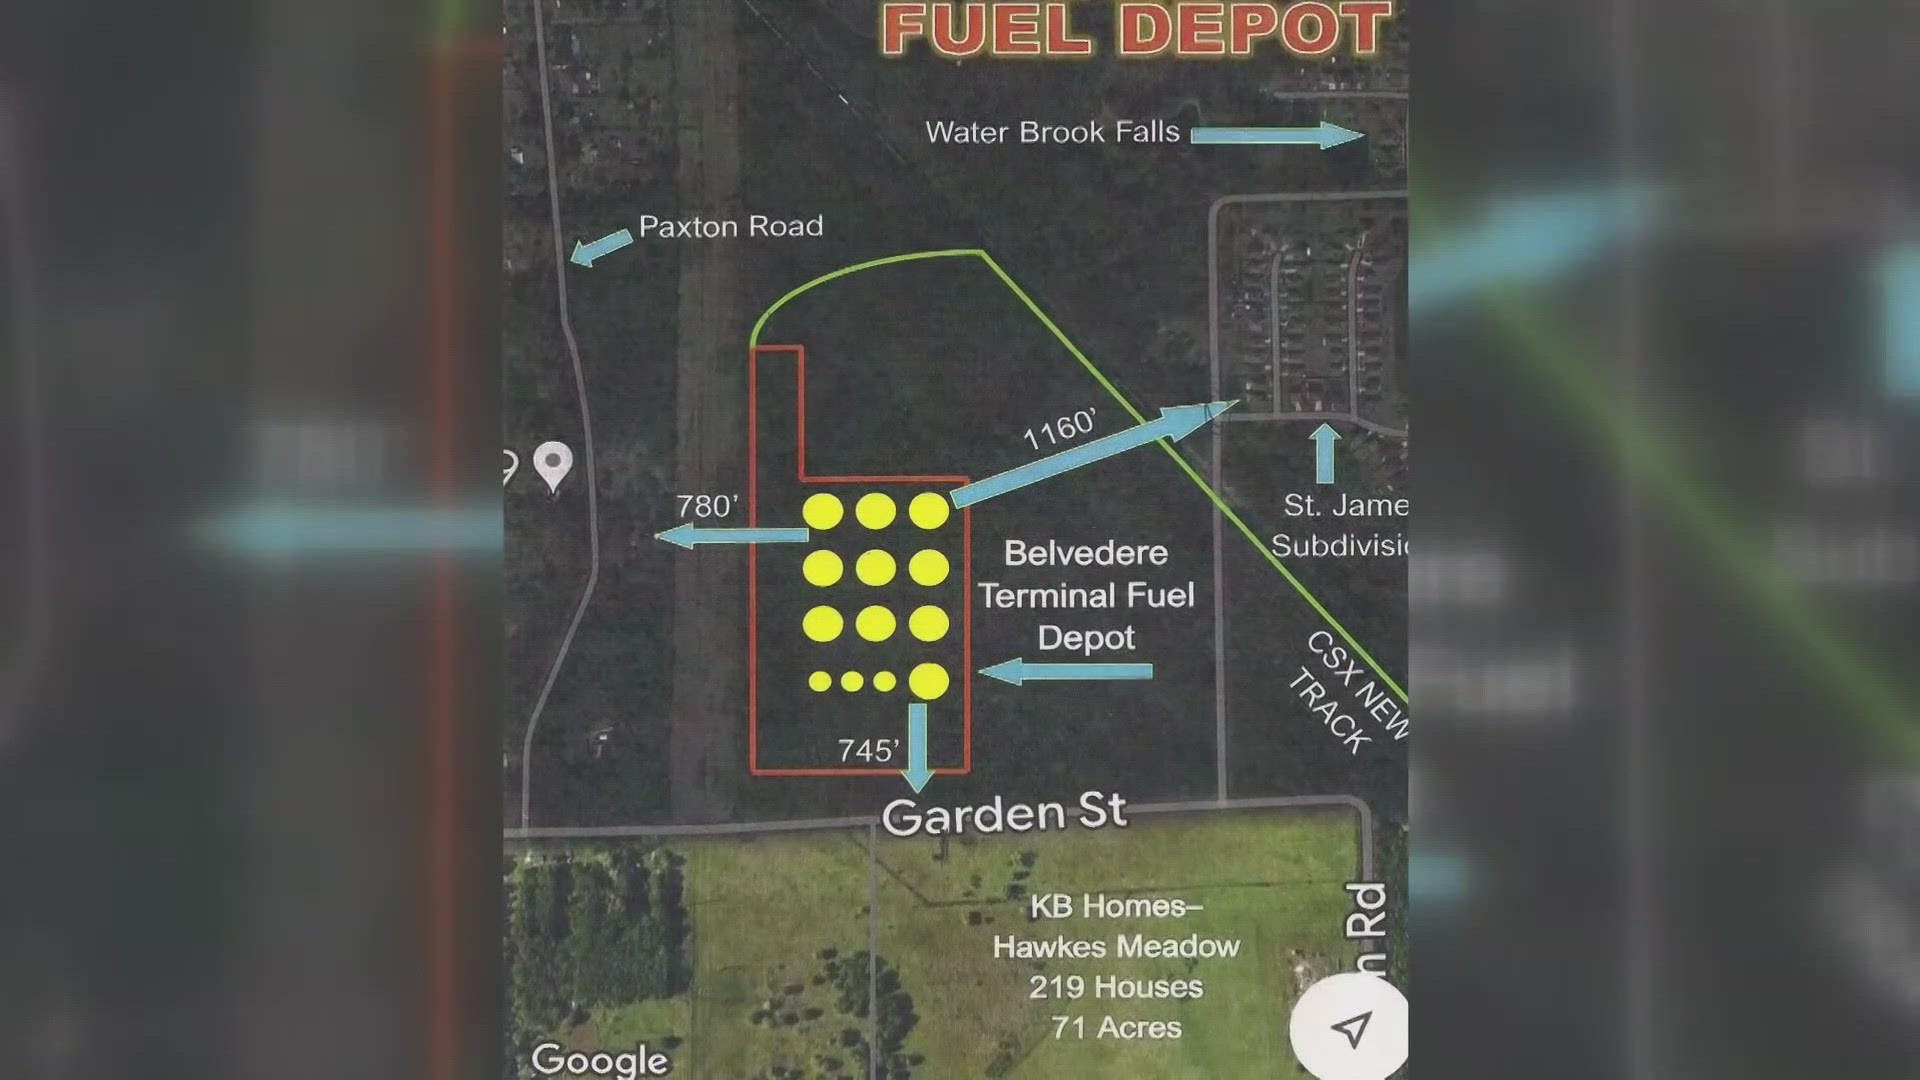 The proposed fuel depot would house millions of gallons of gas and residents living in the area say they are worried about what could happen if something goes wrong.